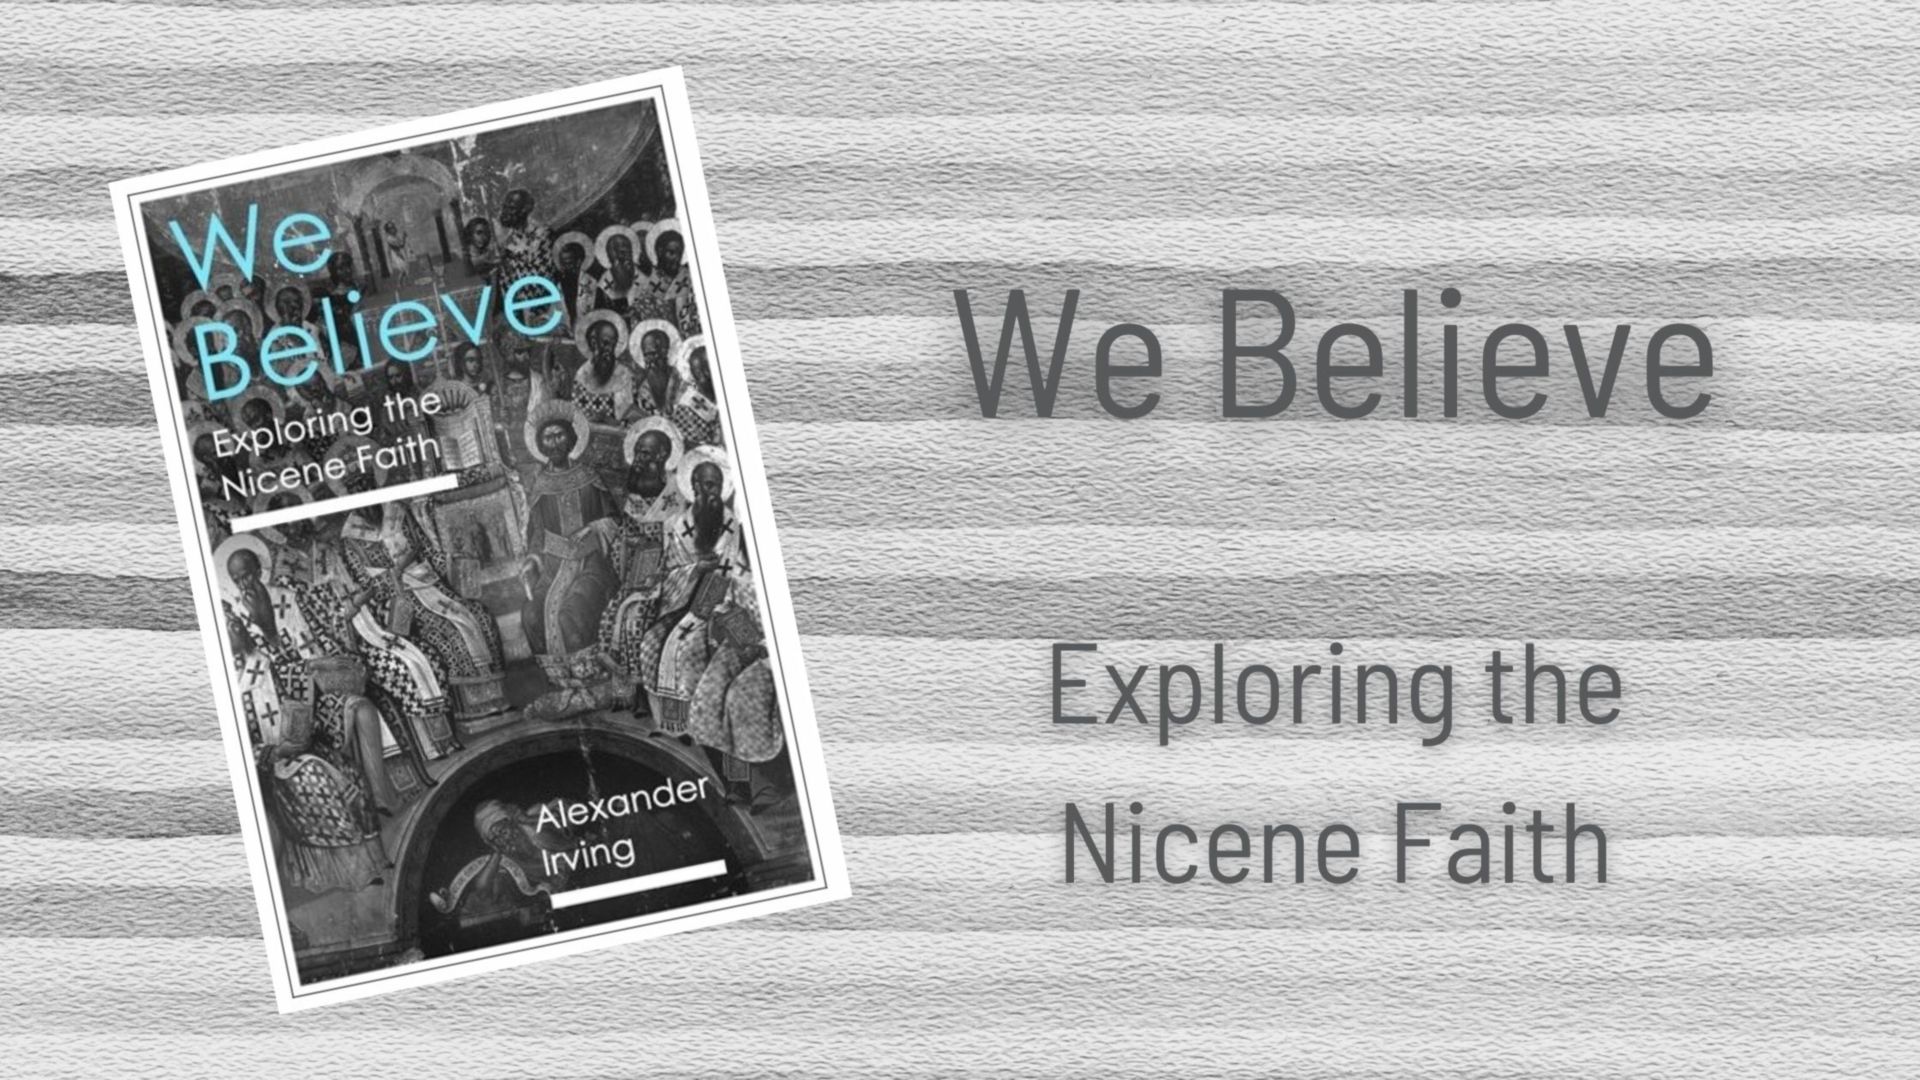 A Review of the book 'We Believe - Exploring the Nicene Faith' by Alexander Irving